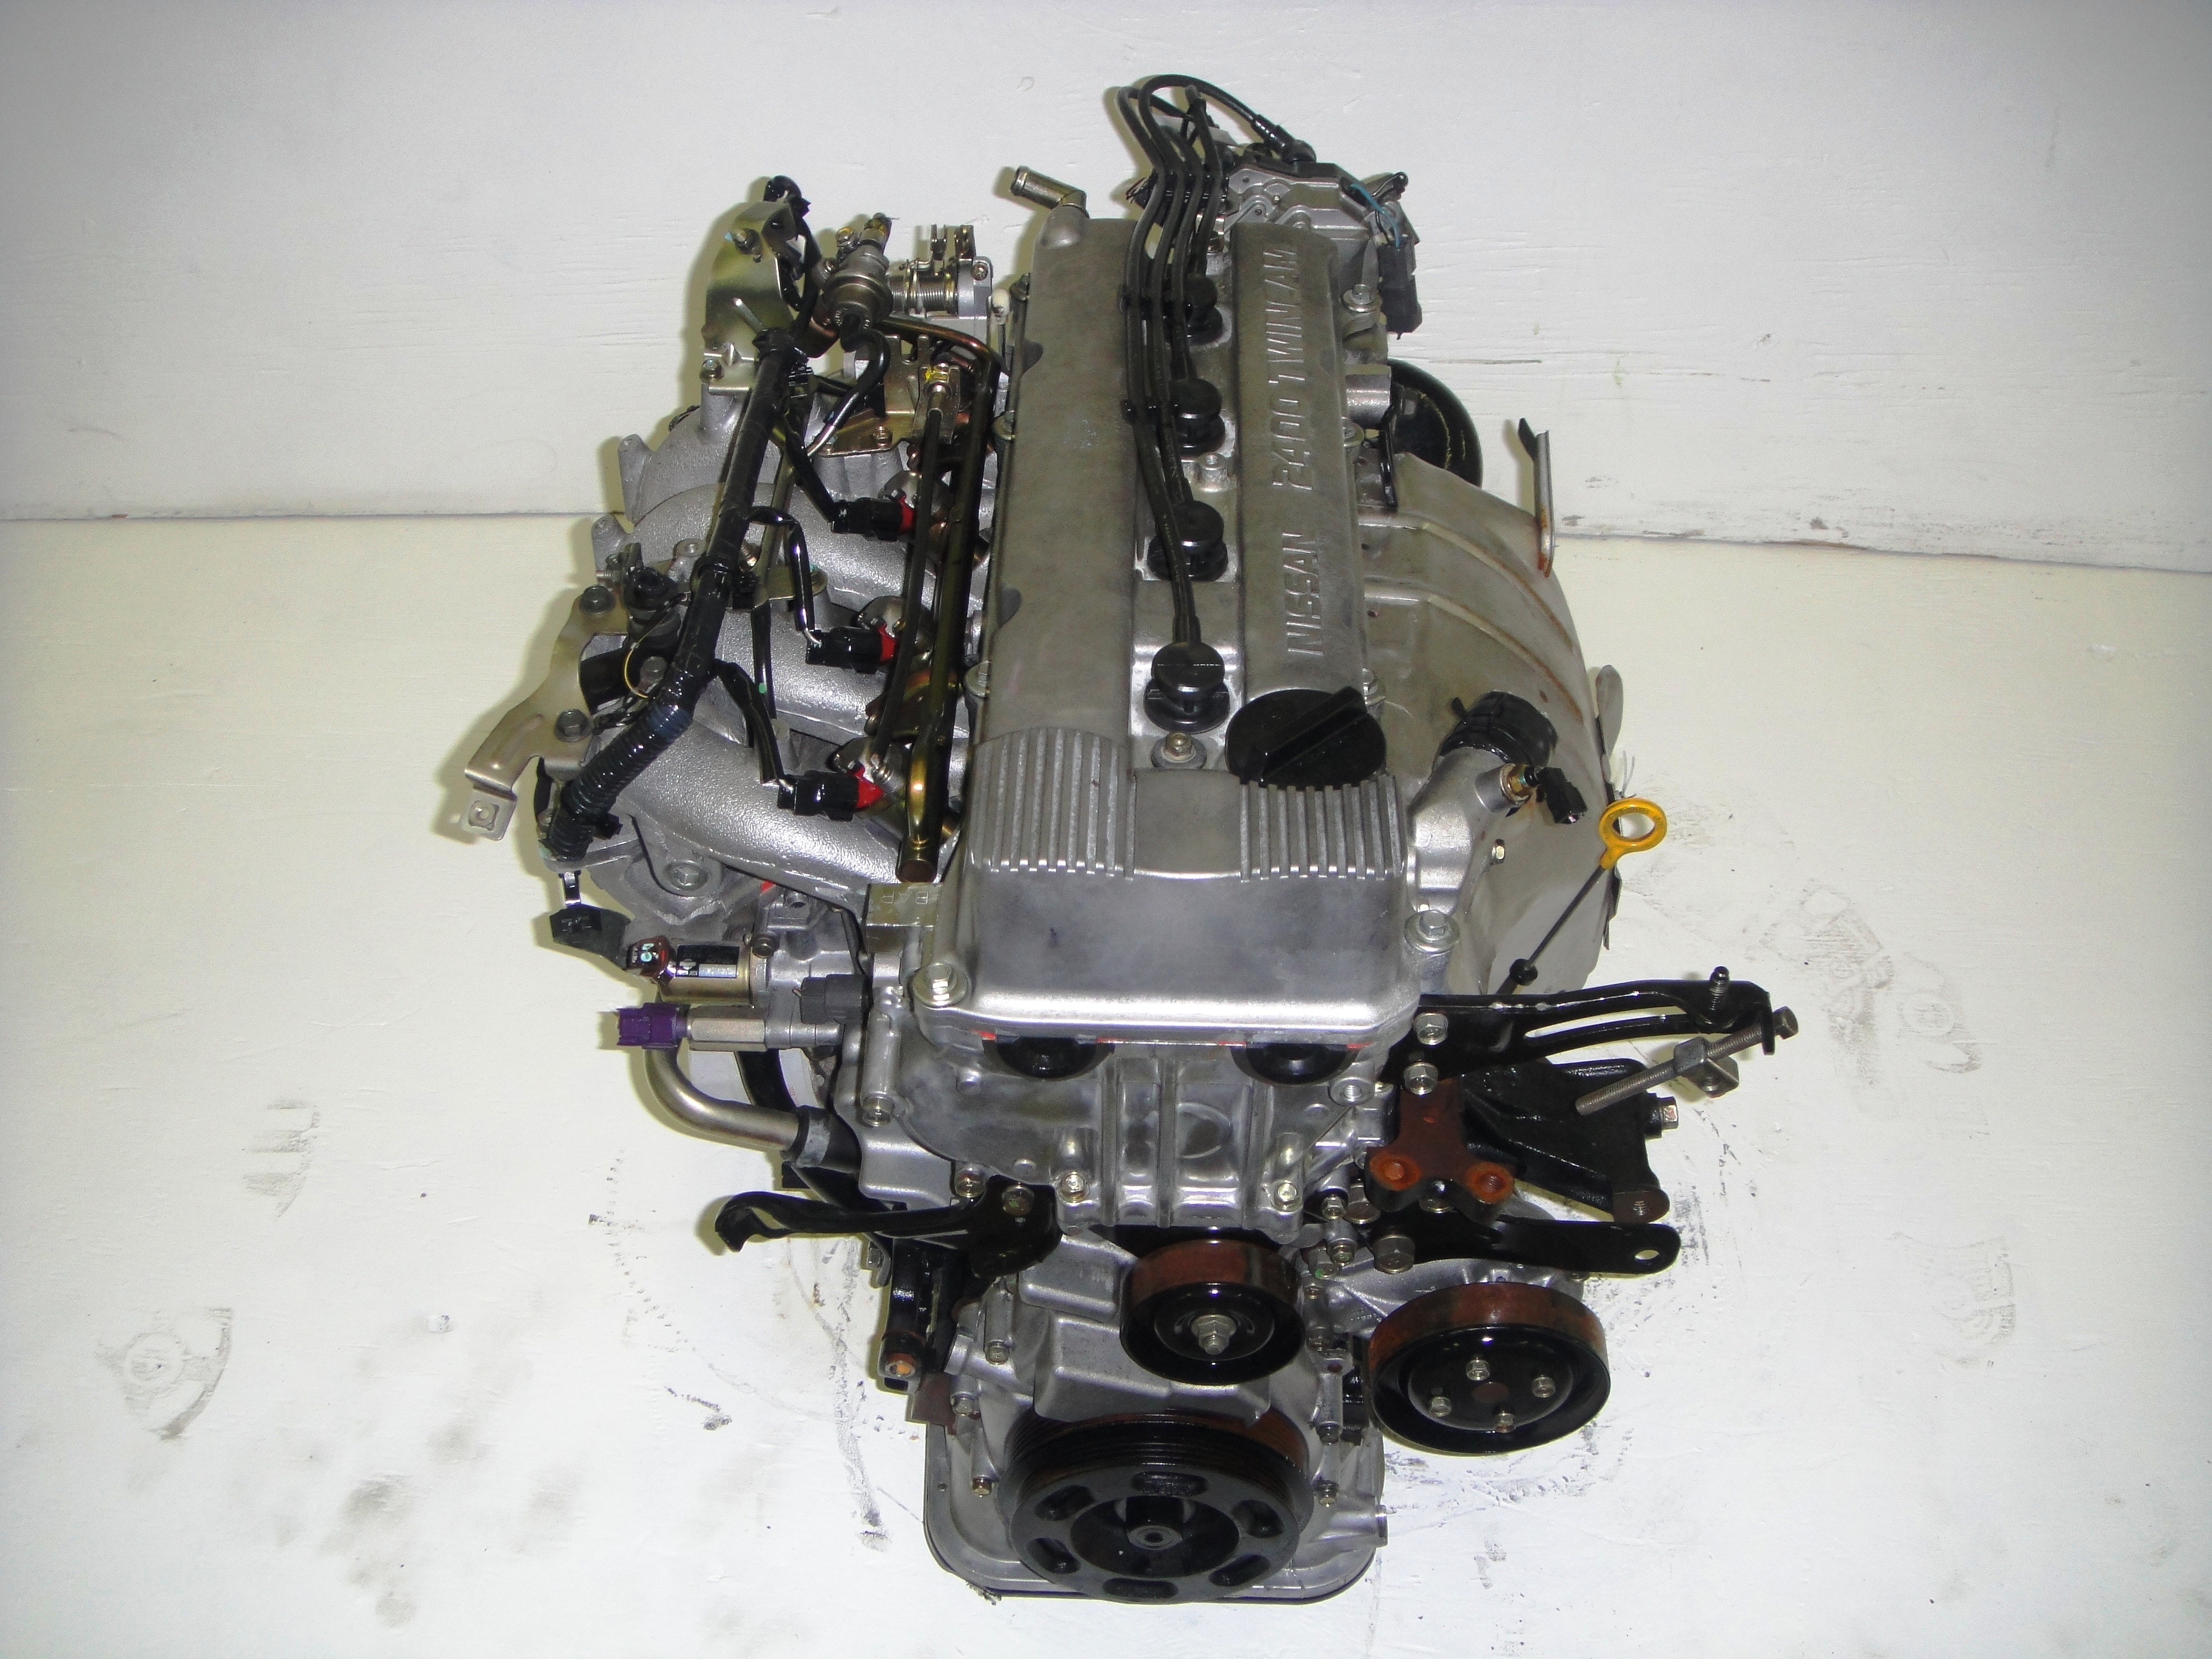 1993 Nissan altima gxe engine #6